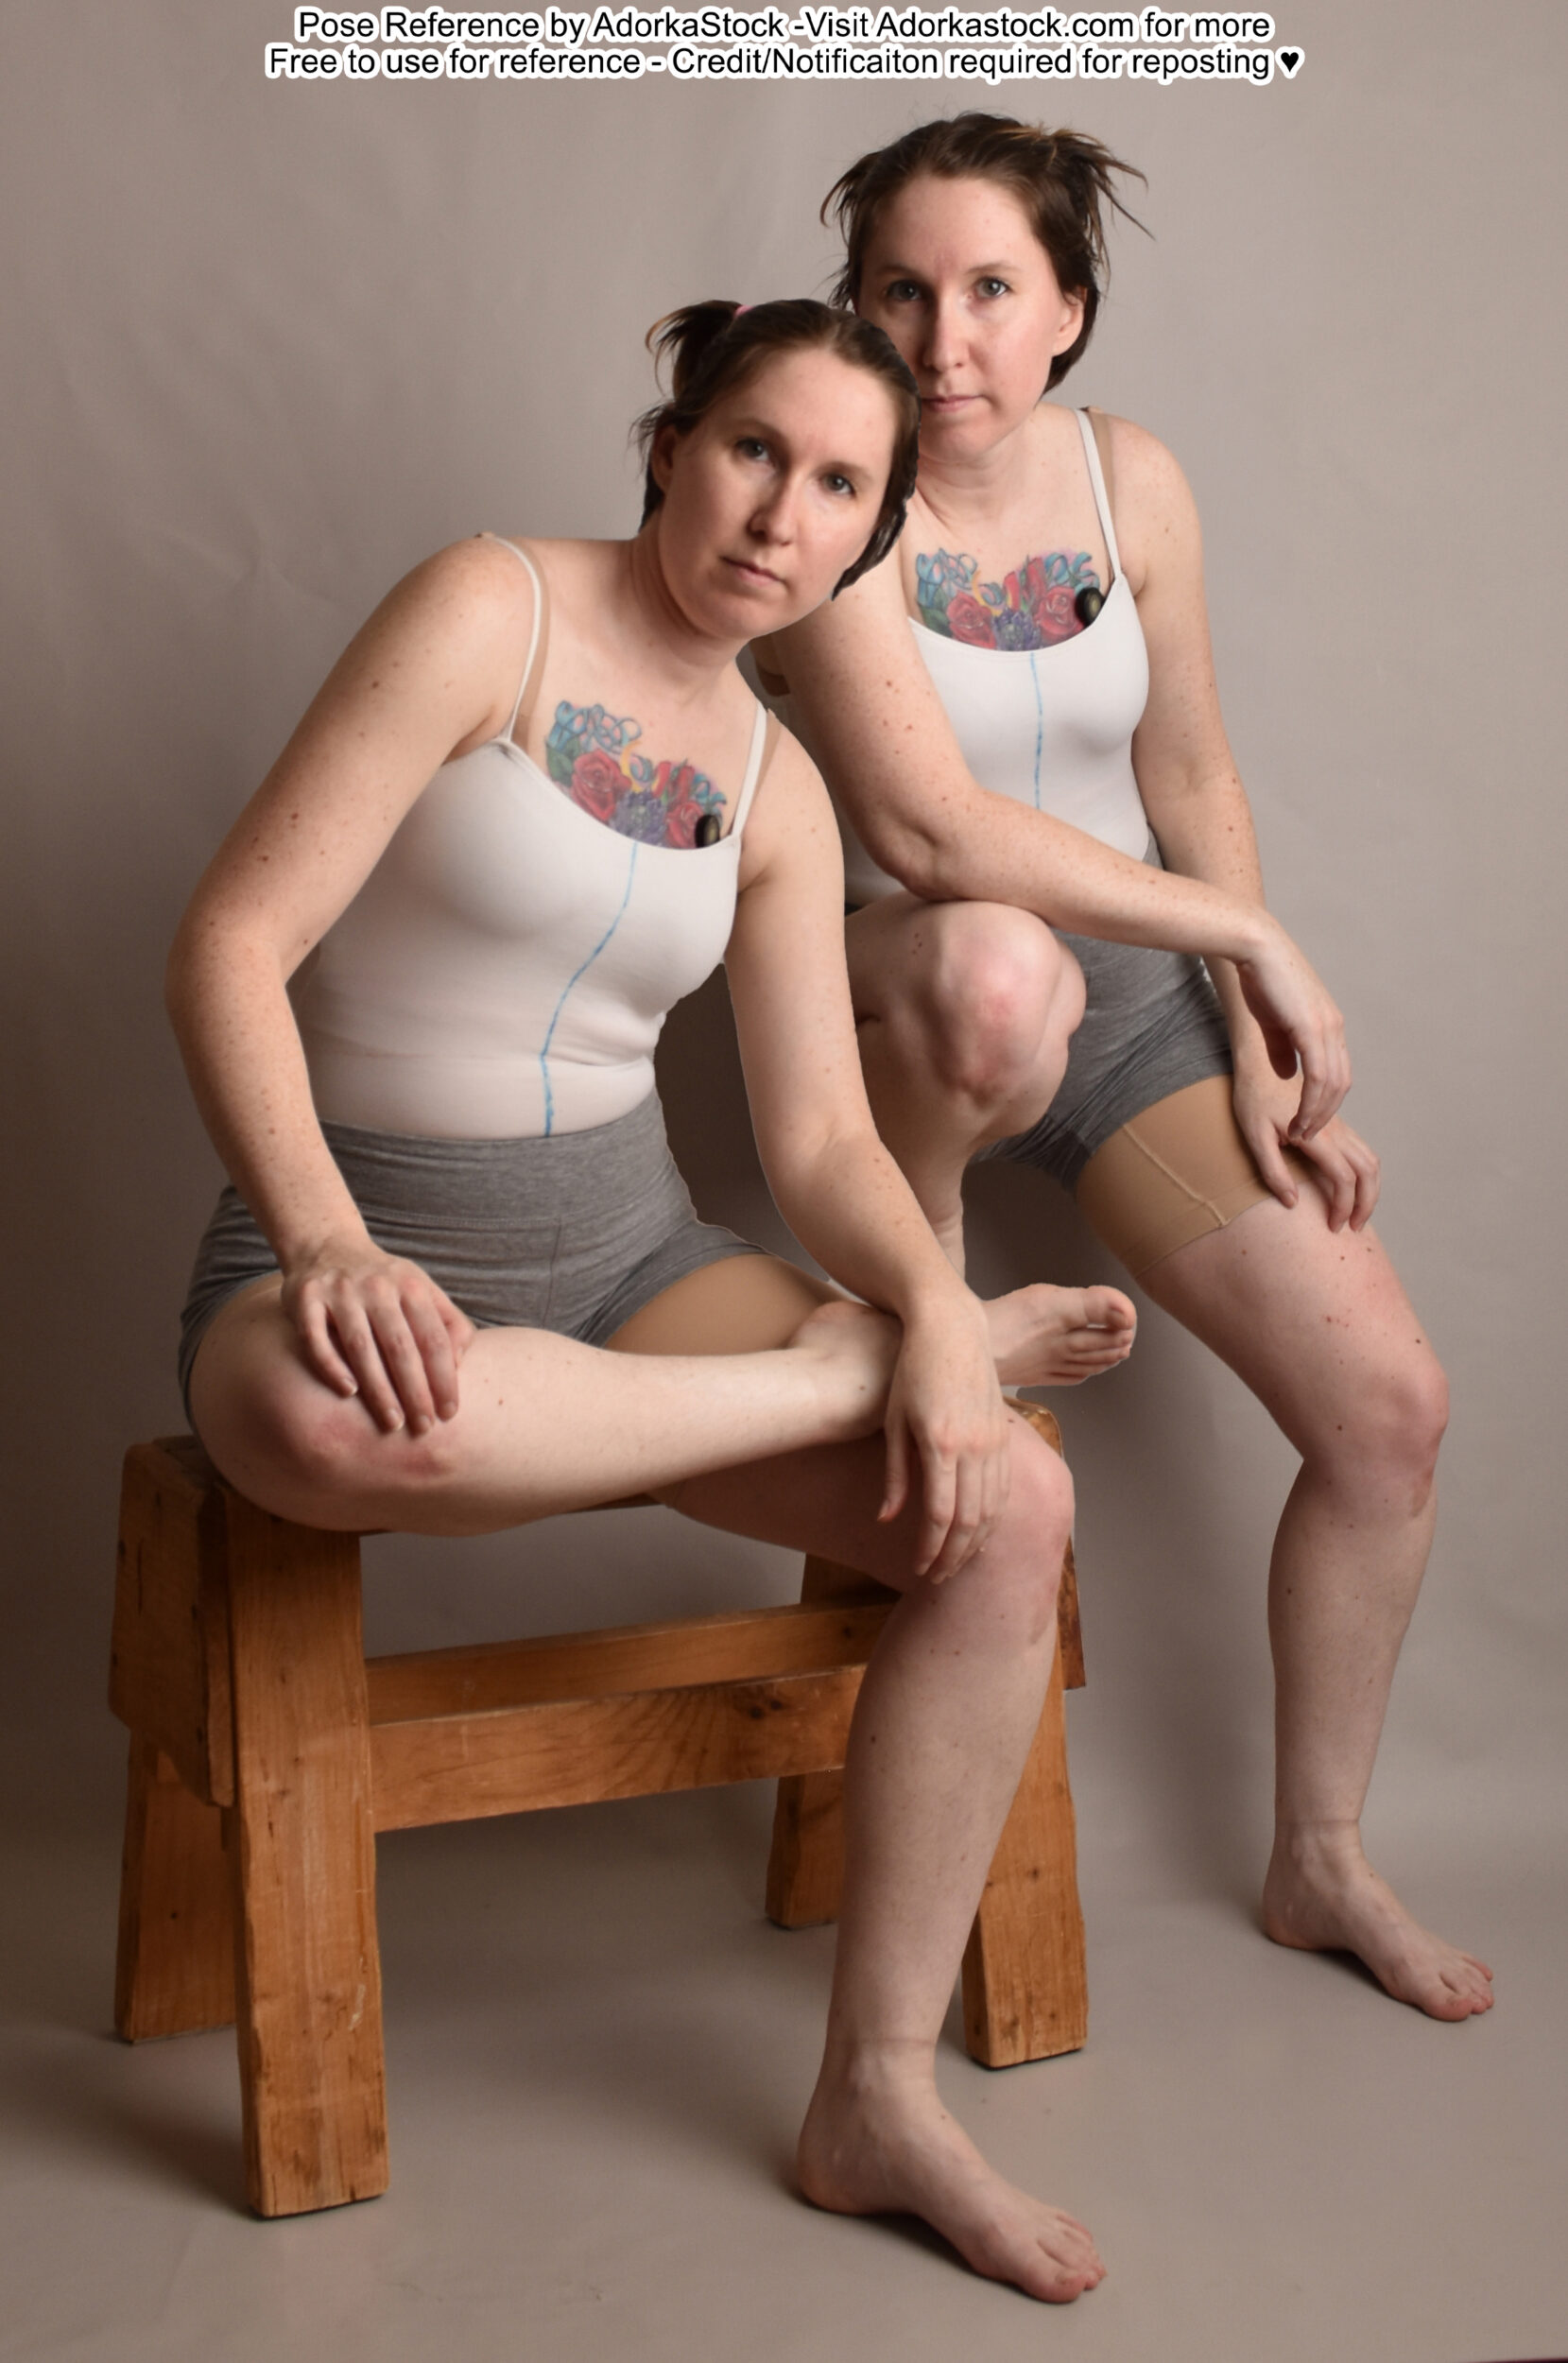 Two thin, white, female pose reference models in sitting, relaxed poses with very serious and slightly judgmental eye contact.